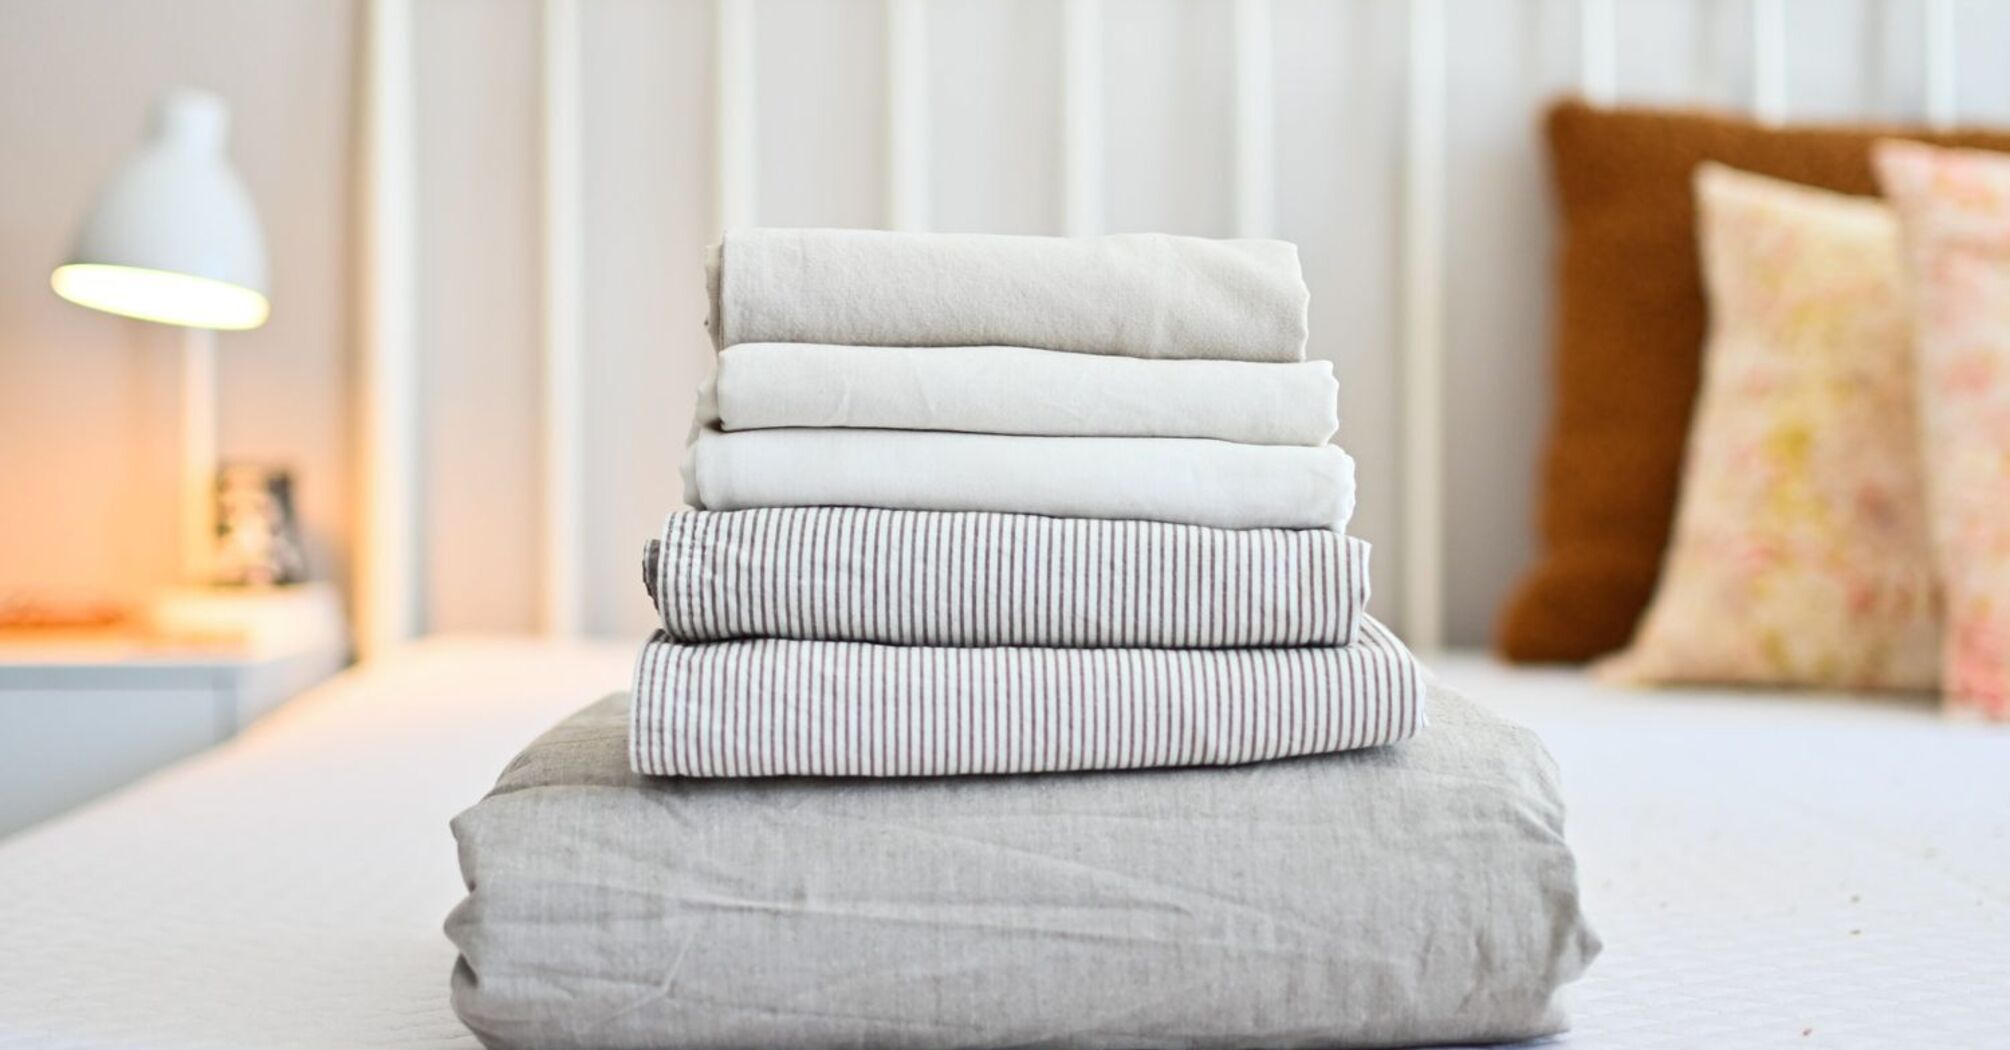 How to wash bedding properly